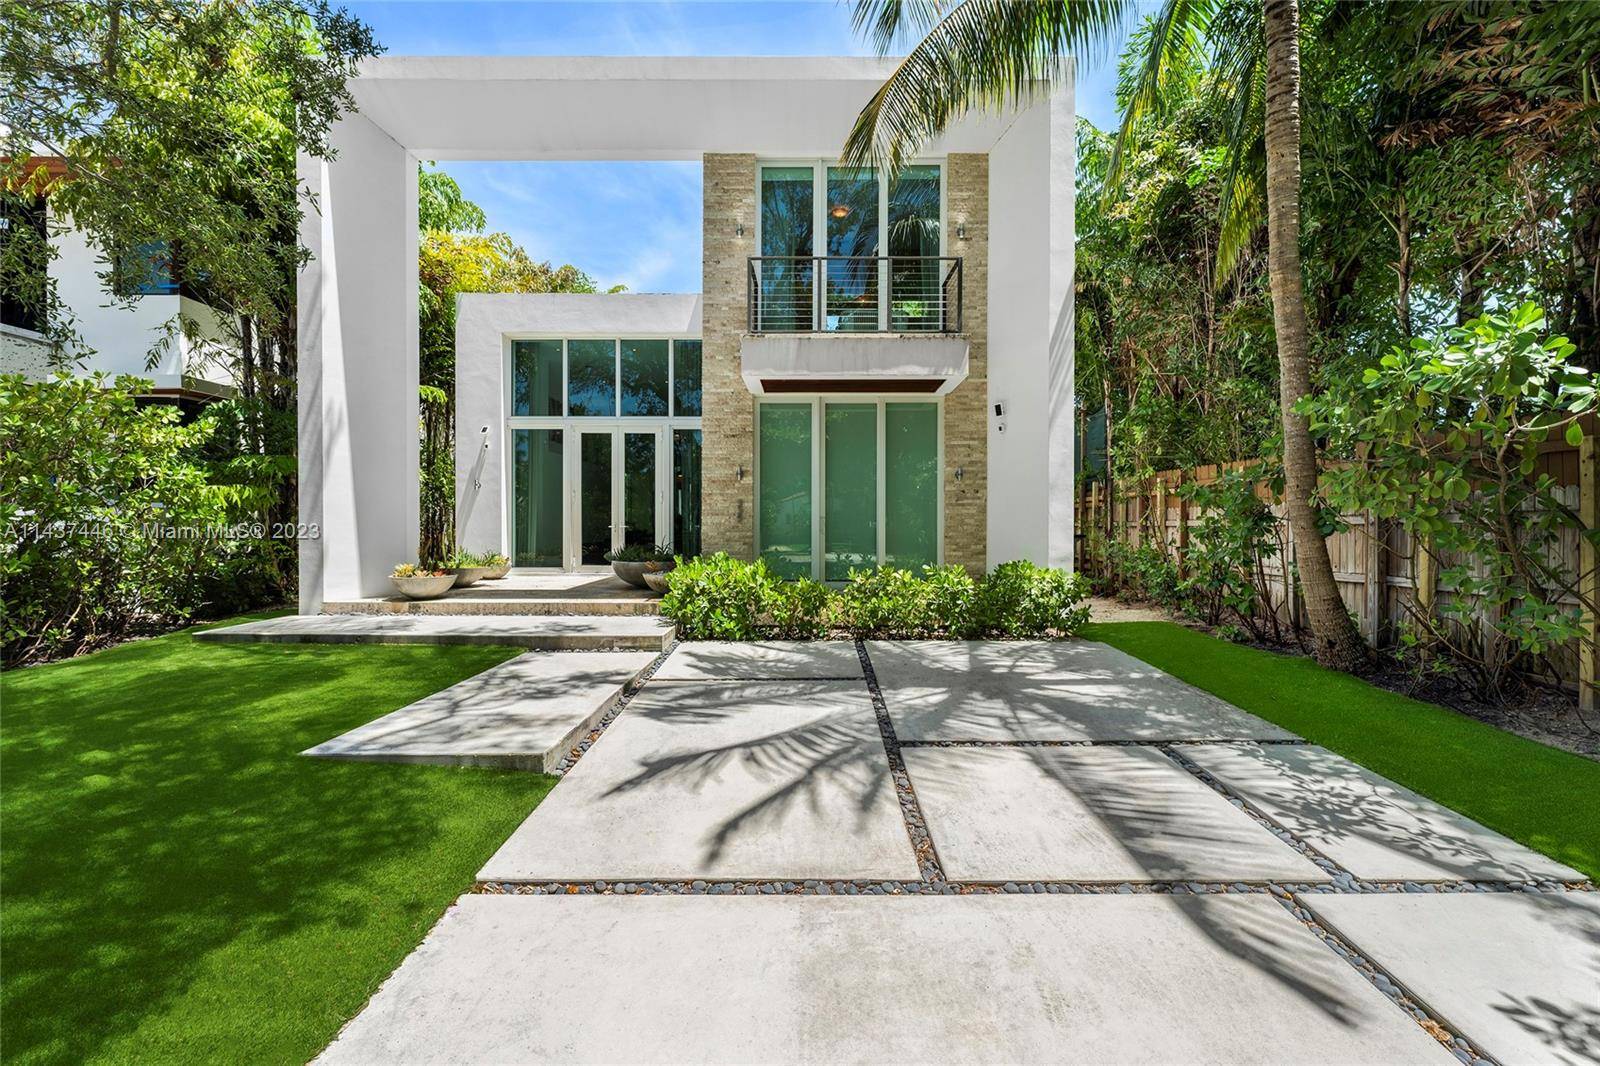 The contemporary 2 story home boasts a sleek design and is situated on a lushly landscaped 7, 500 SF lot.